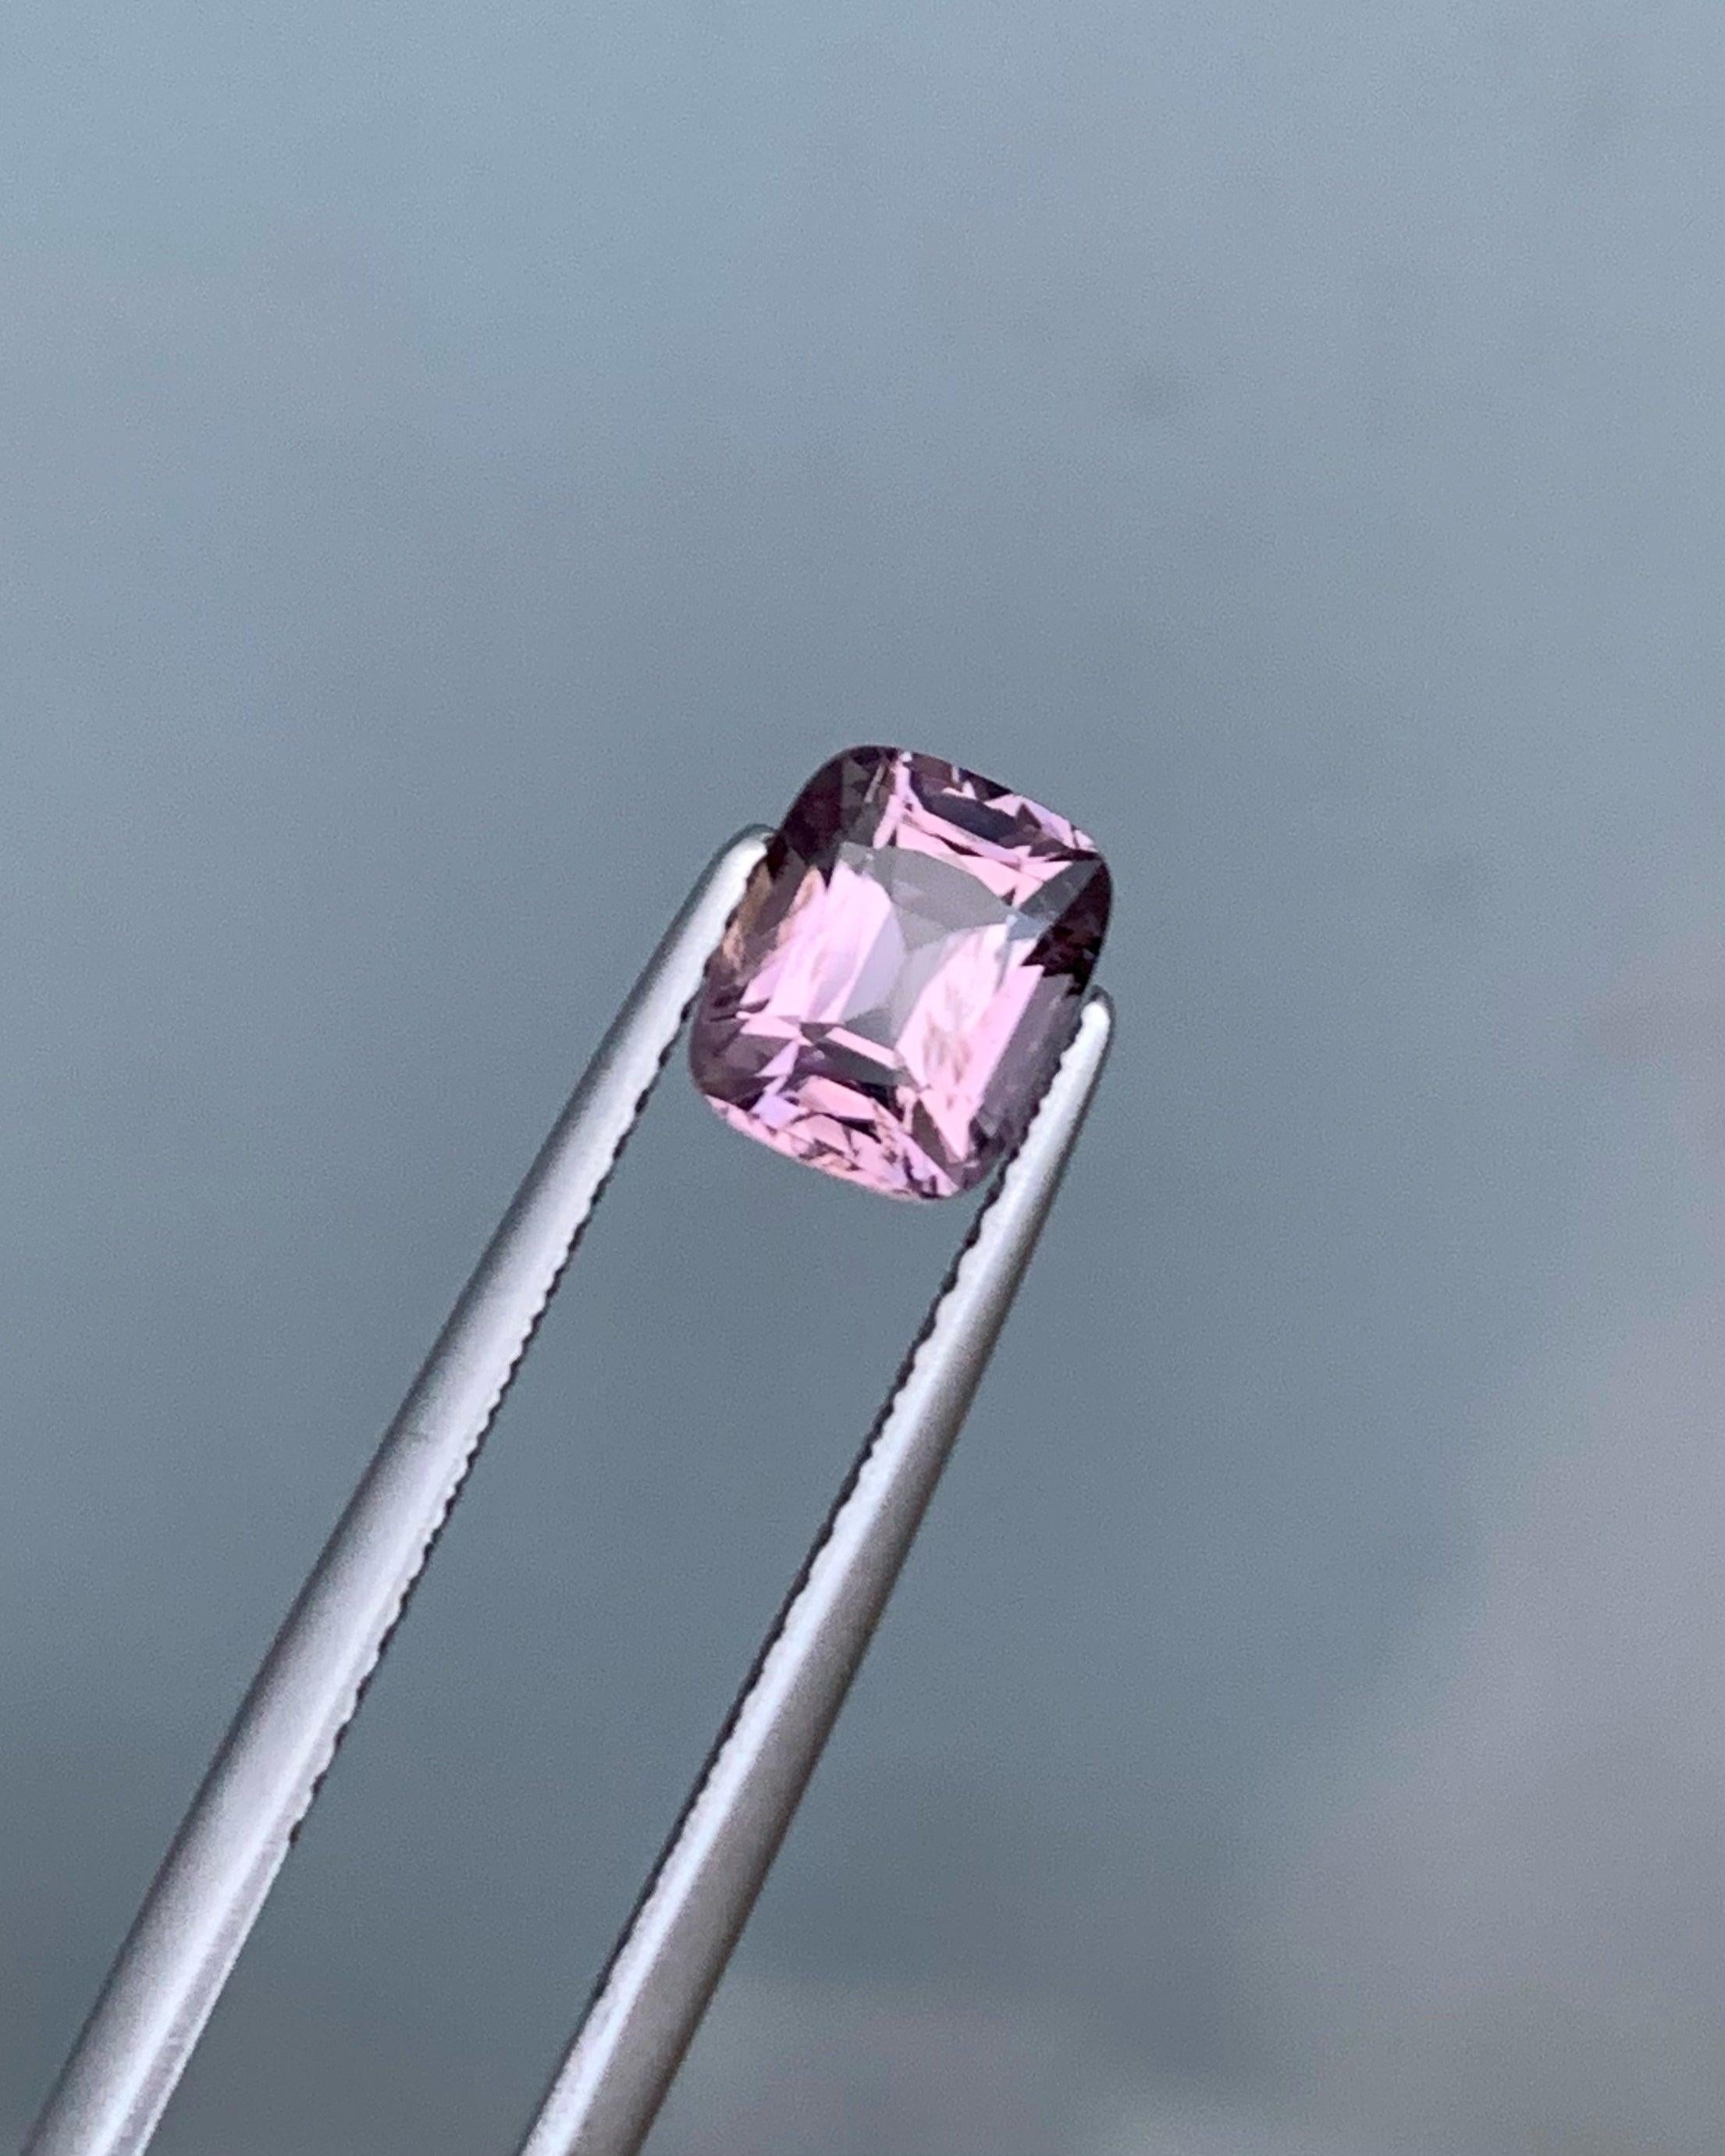 Dazzling Purple Spinel Cut Gemstone, Available For Sale At Wholesale Price Natural High Quality 1.60 carats VSI Clarity Natural Spinel from Burma.

Product Information:
GEMSTONE TYPE:	Dazzling Purple Spinel Cut Gemstone
WEIGHT:	1.60